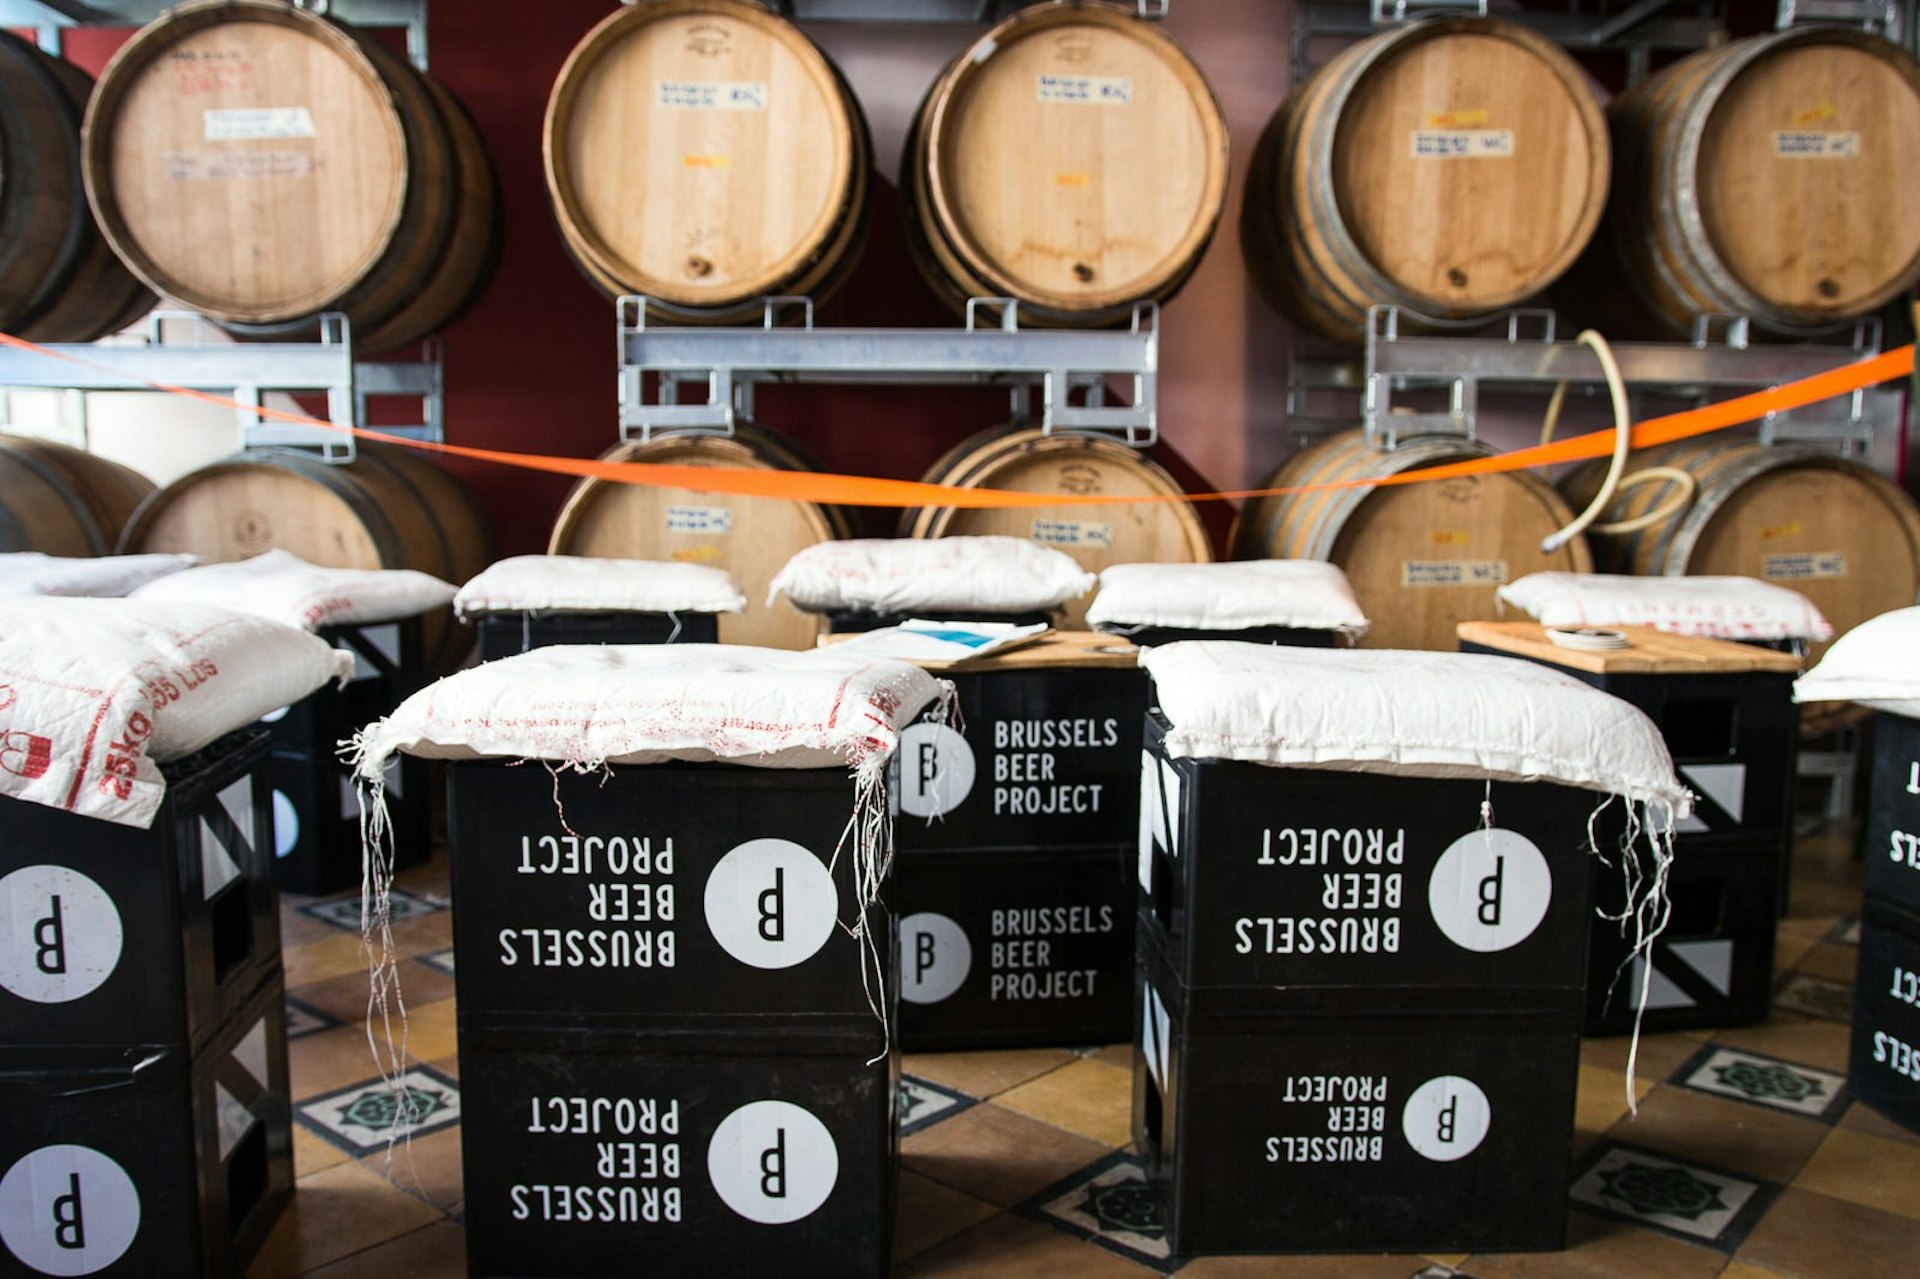 black plastic beer crates with 'Brussels beer project' and the company logo printed on them are stacked in front of wooden barrels. Sacks are placed on top of the crates to make seats. 